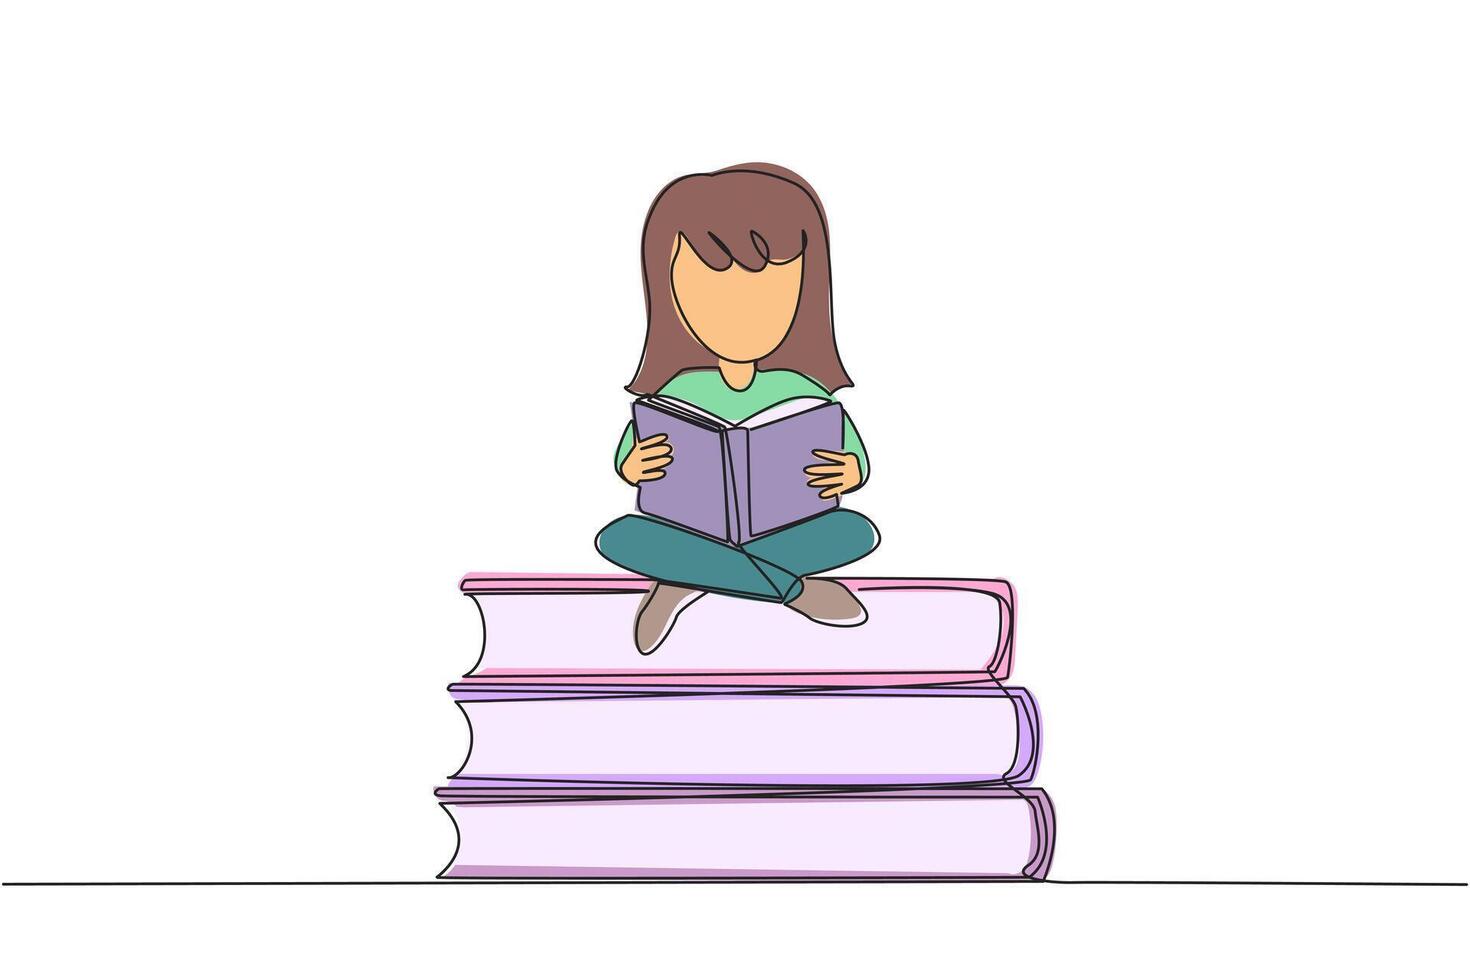 Single one line drawing girl sit cross-legged on pile of large books. Reading comic. Reading textbook. Read scientific journals. Reading increase insight. Continuous line design graphic illustration vector